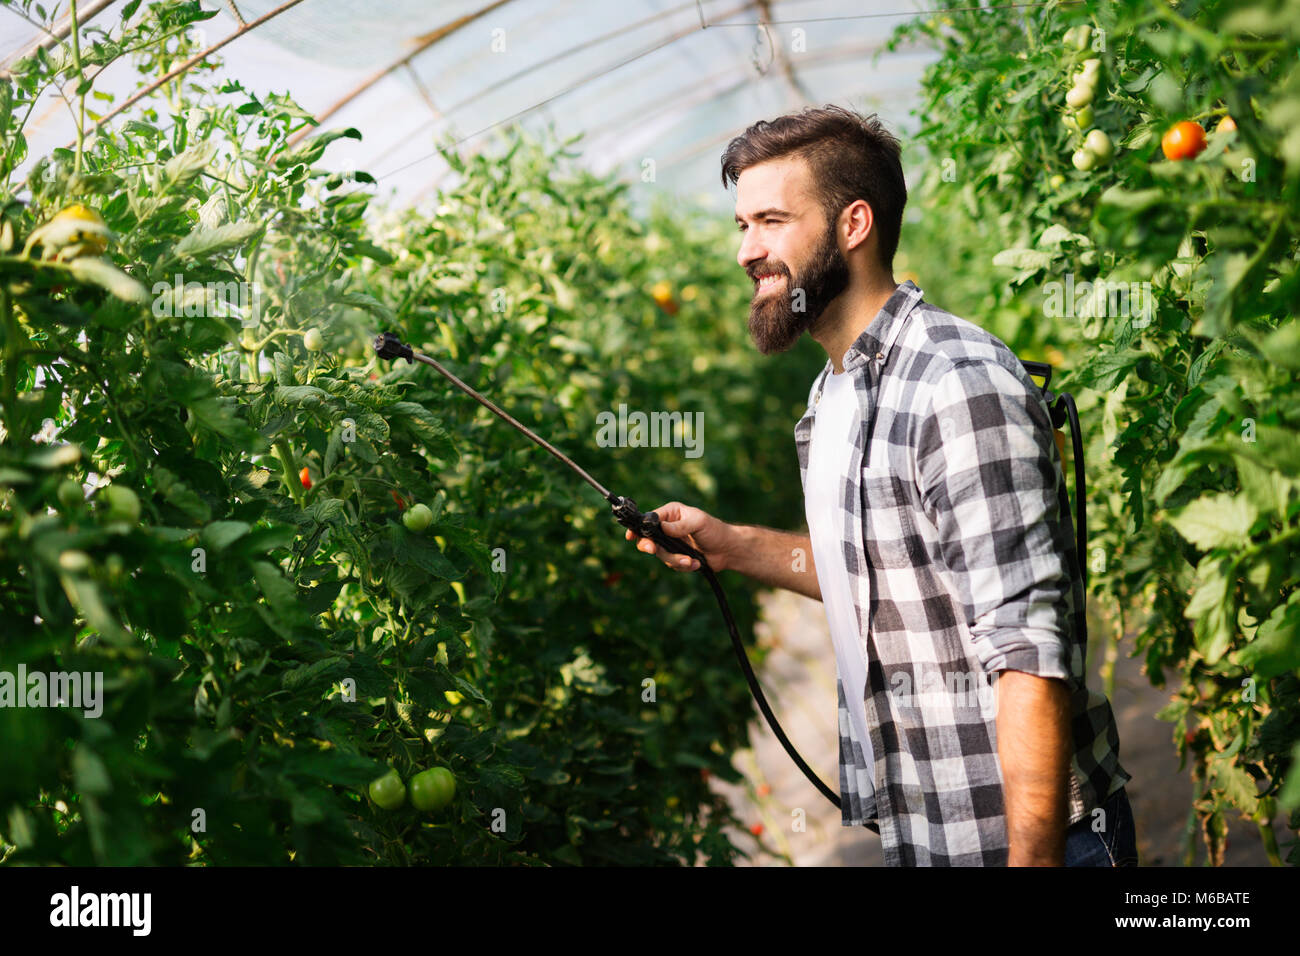 Young farmer protecting his plants with chemicals Stock Photo